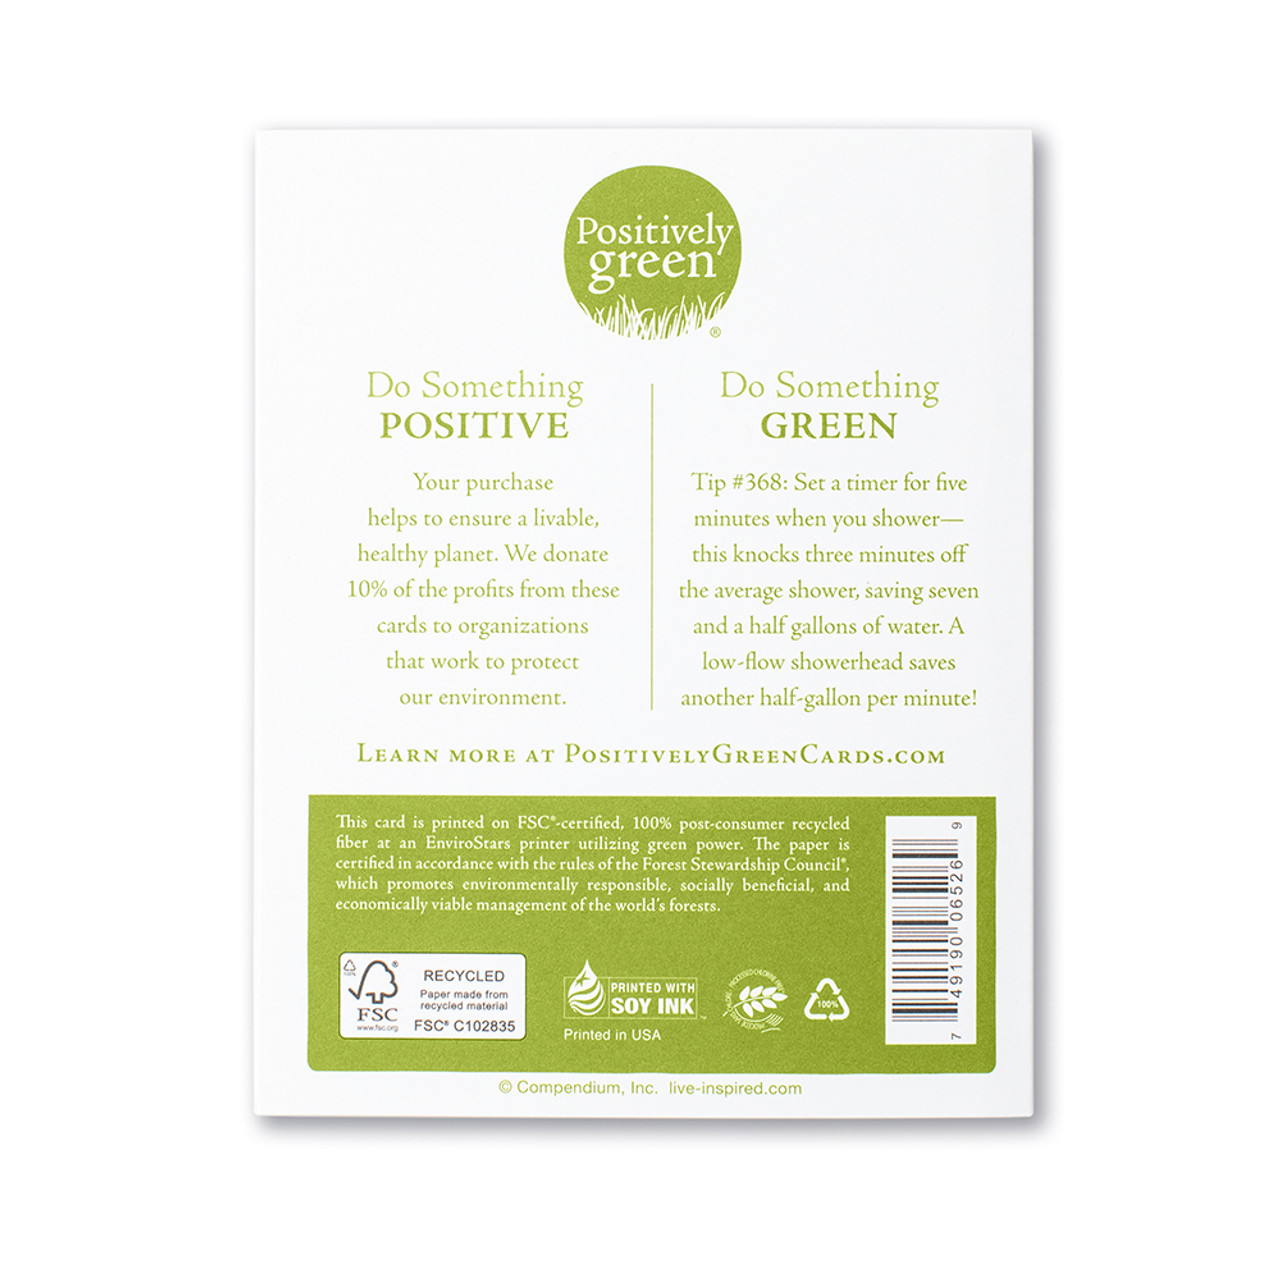 Positively Green Birthday Greeting Card - “All good things are wild and free.” —Henry David Thoreau - Mellow Monkey